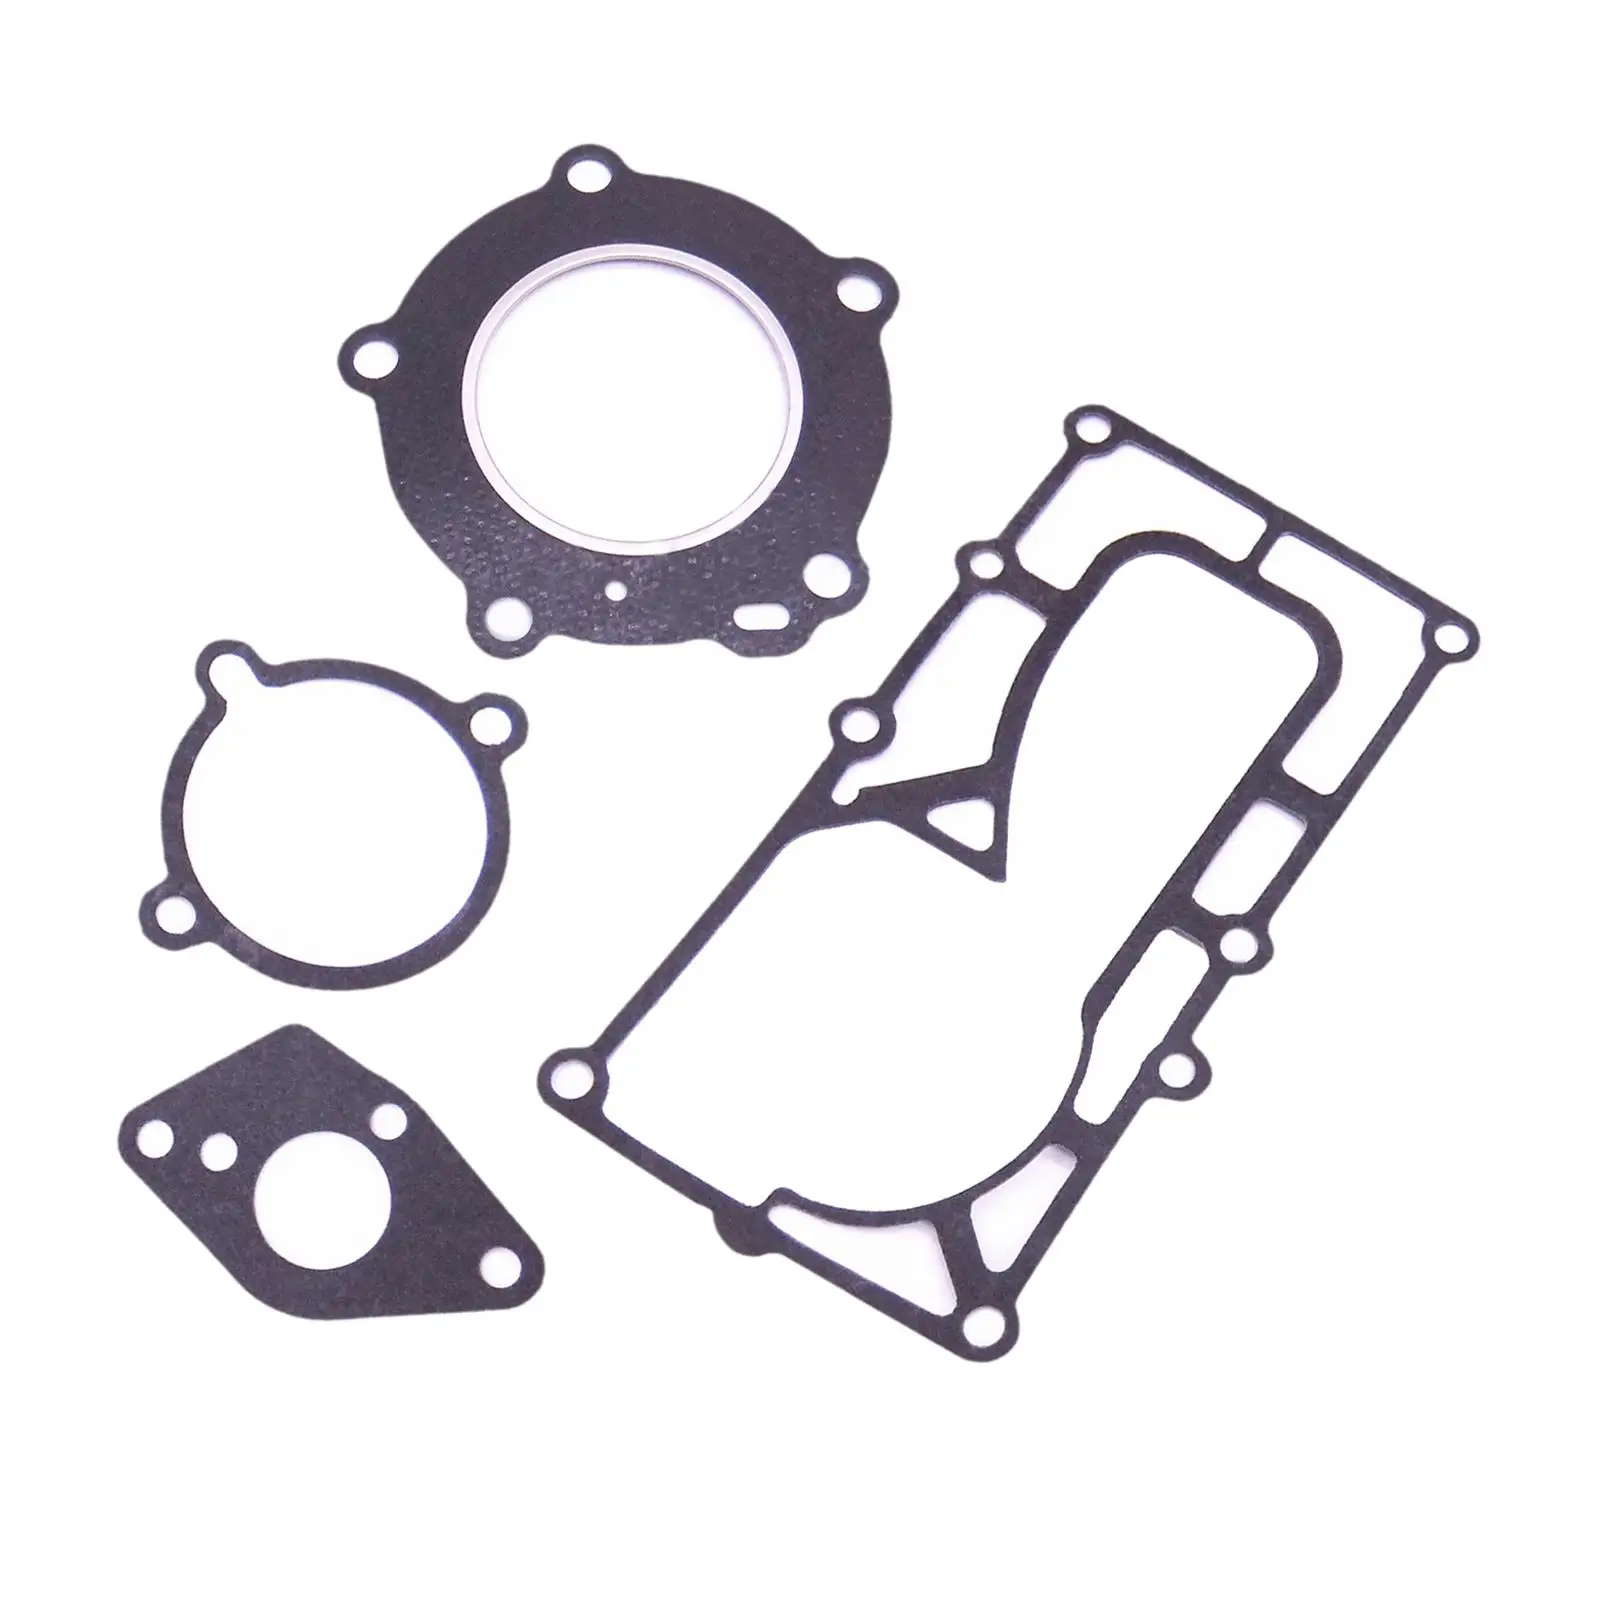 Seal Gasket Kit, 369-02011-0 36961-0120M, 369020M, 36901-0051M, 36901-2140M, 369-01005-1 Boat for 4HP 5HP Outboard Engine